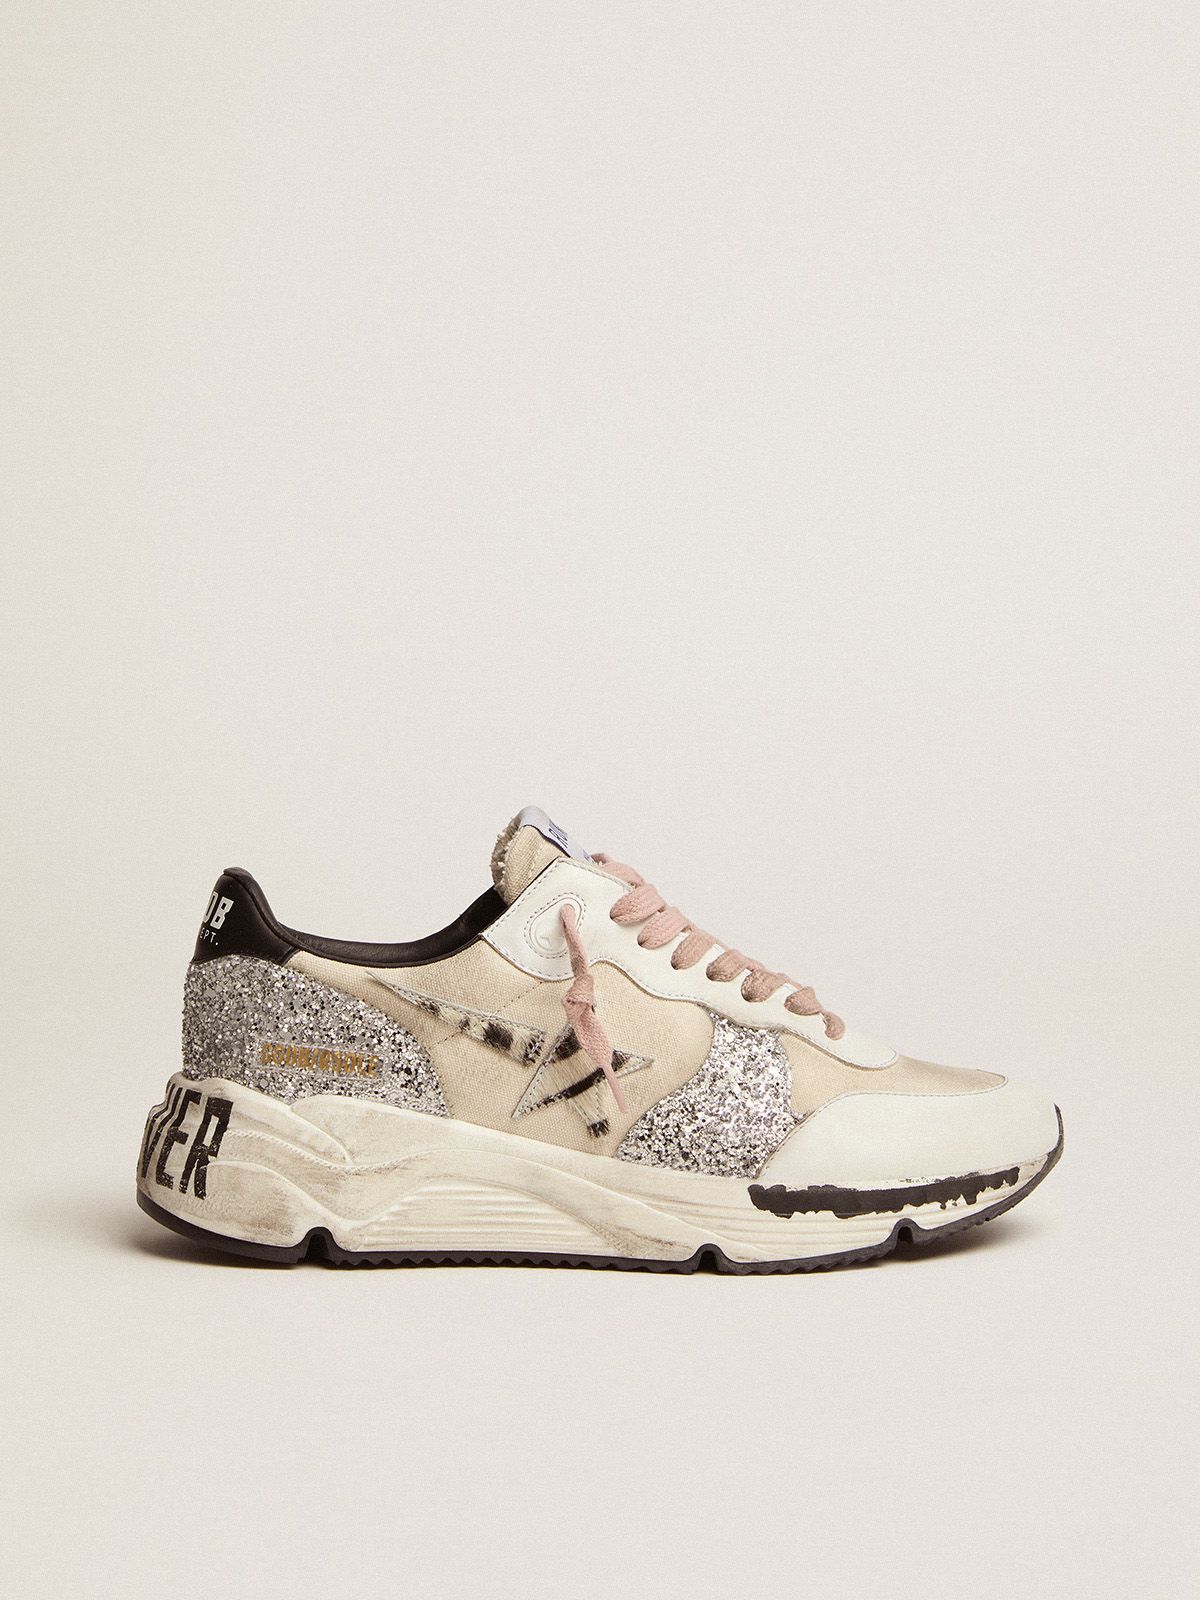 golden goose with star pony skin and zebra-print sneakers cream upper Sole Running canvas